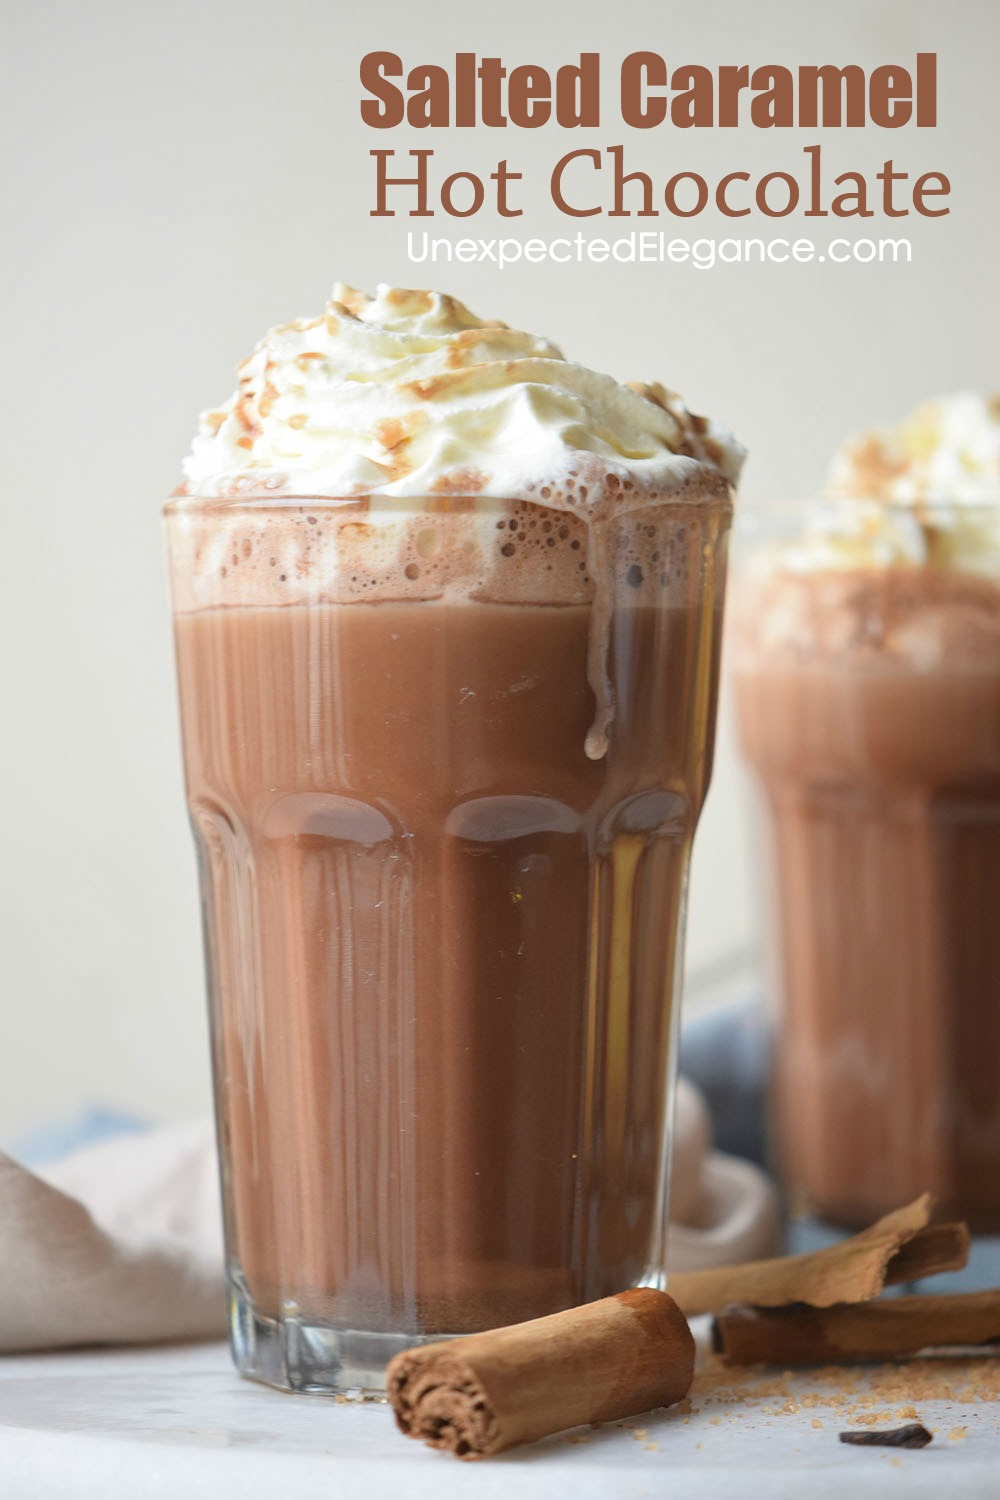 This recipe for salted caramel hot chocolate is so delicious!! It's a cozy drink on a cold day and tastes like Starbucks...without the high price tag!